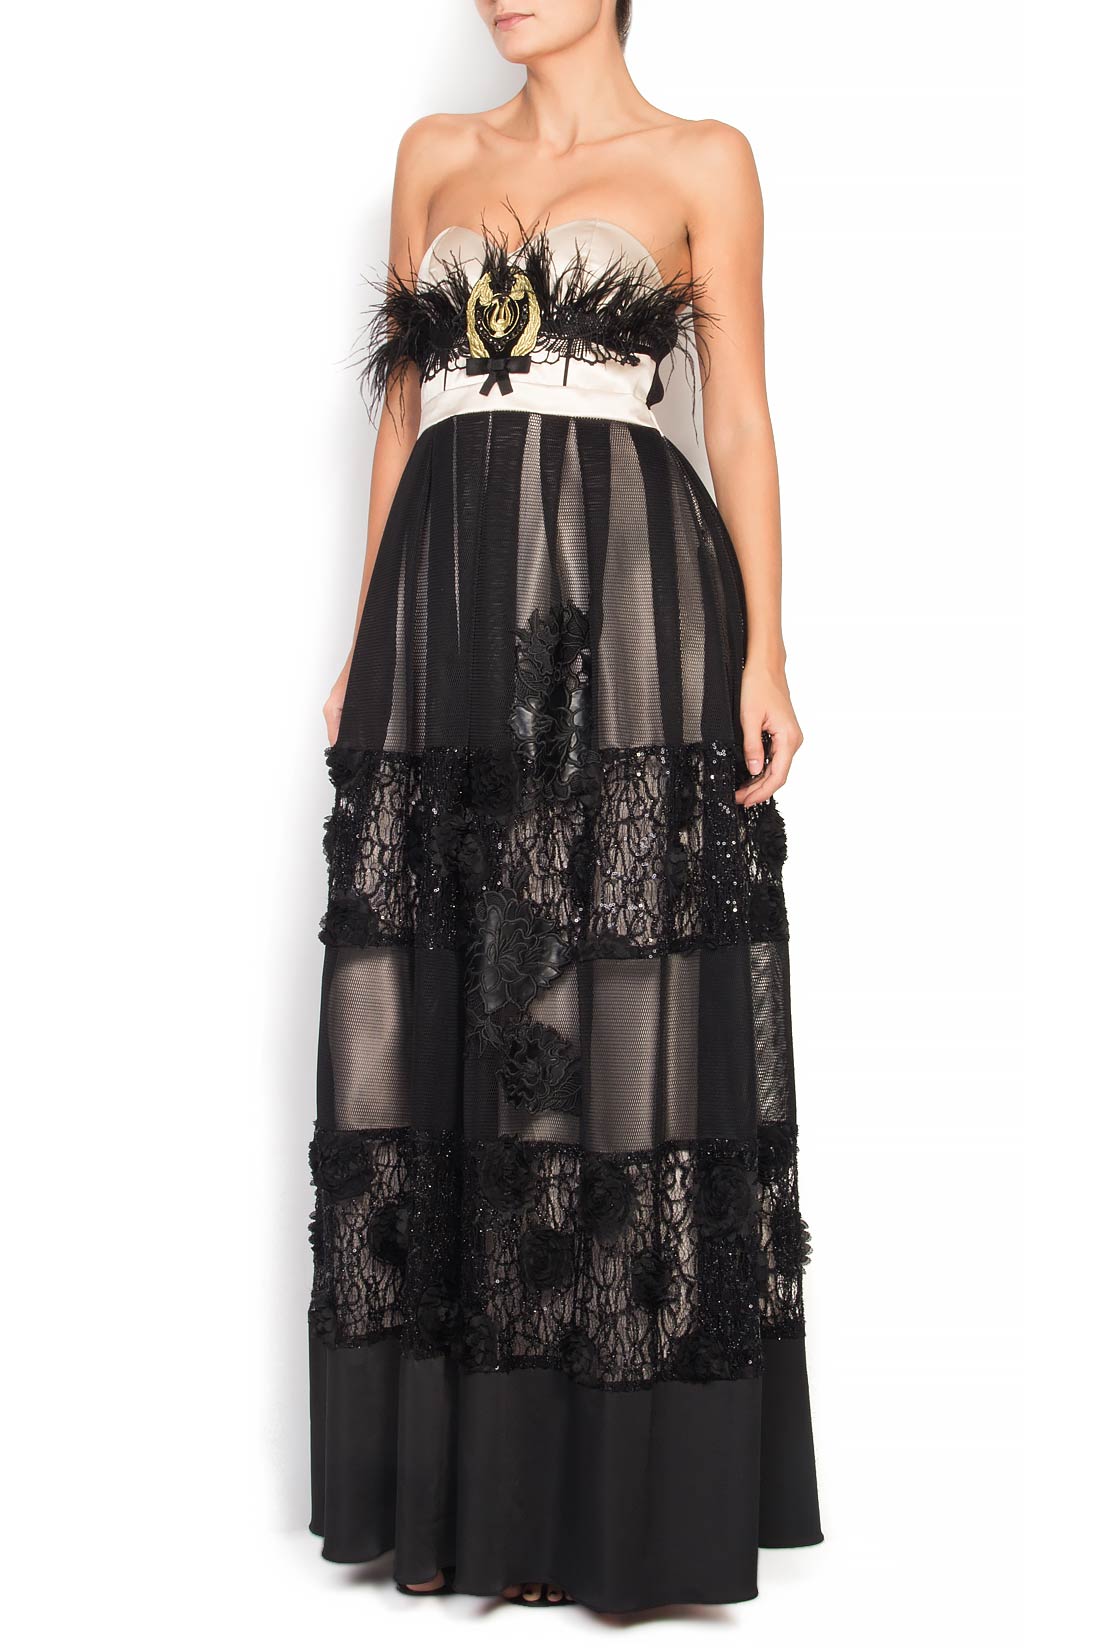 Silk and lace maxi dress with feathers Elena Perseil image 1